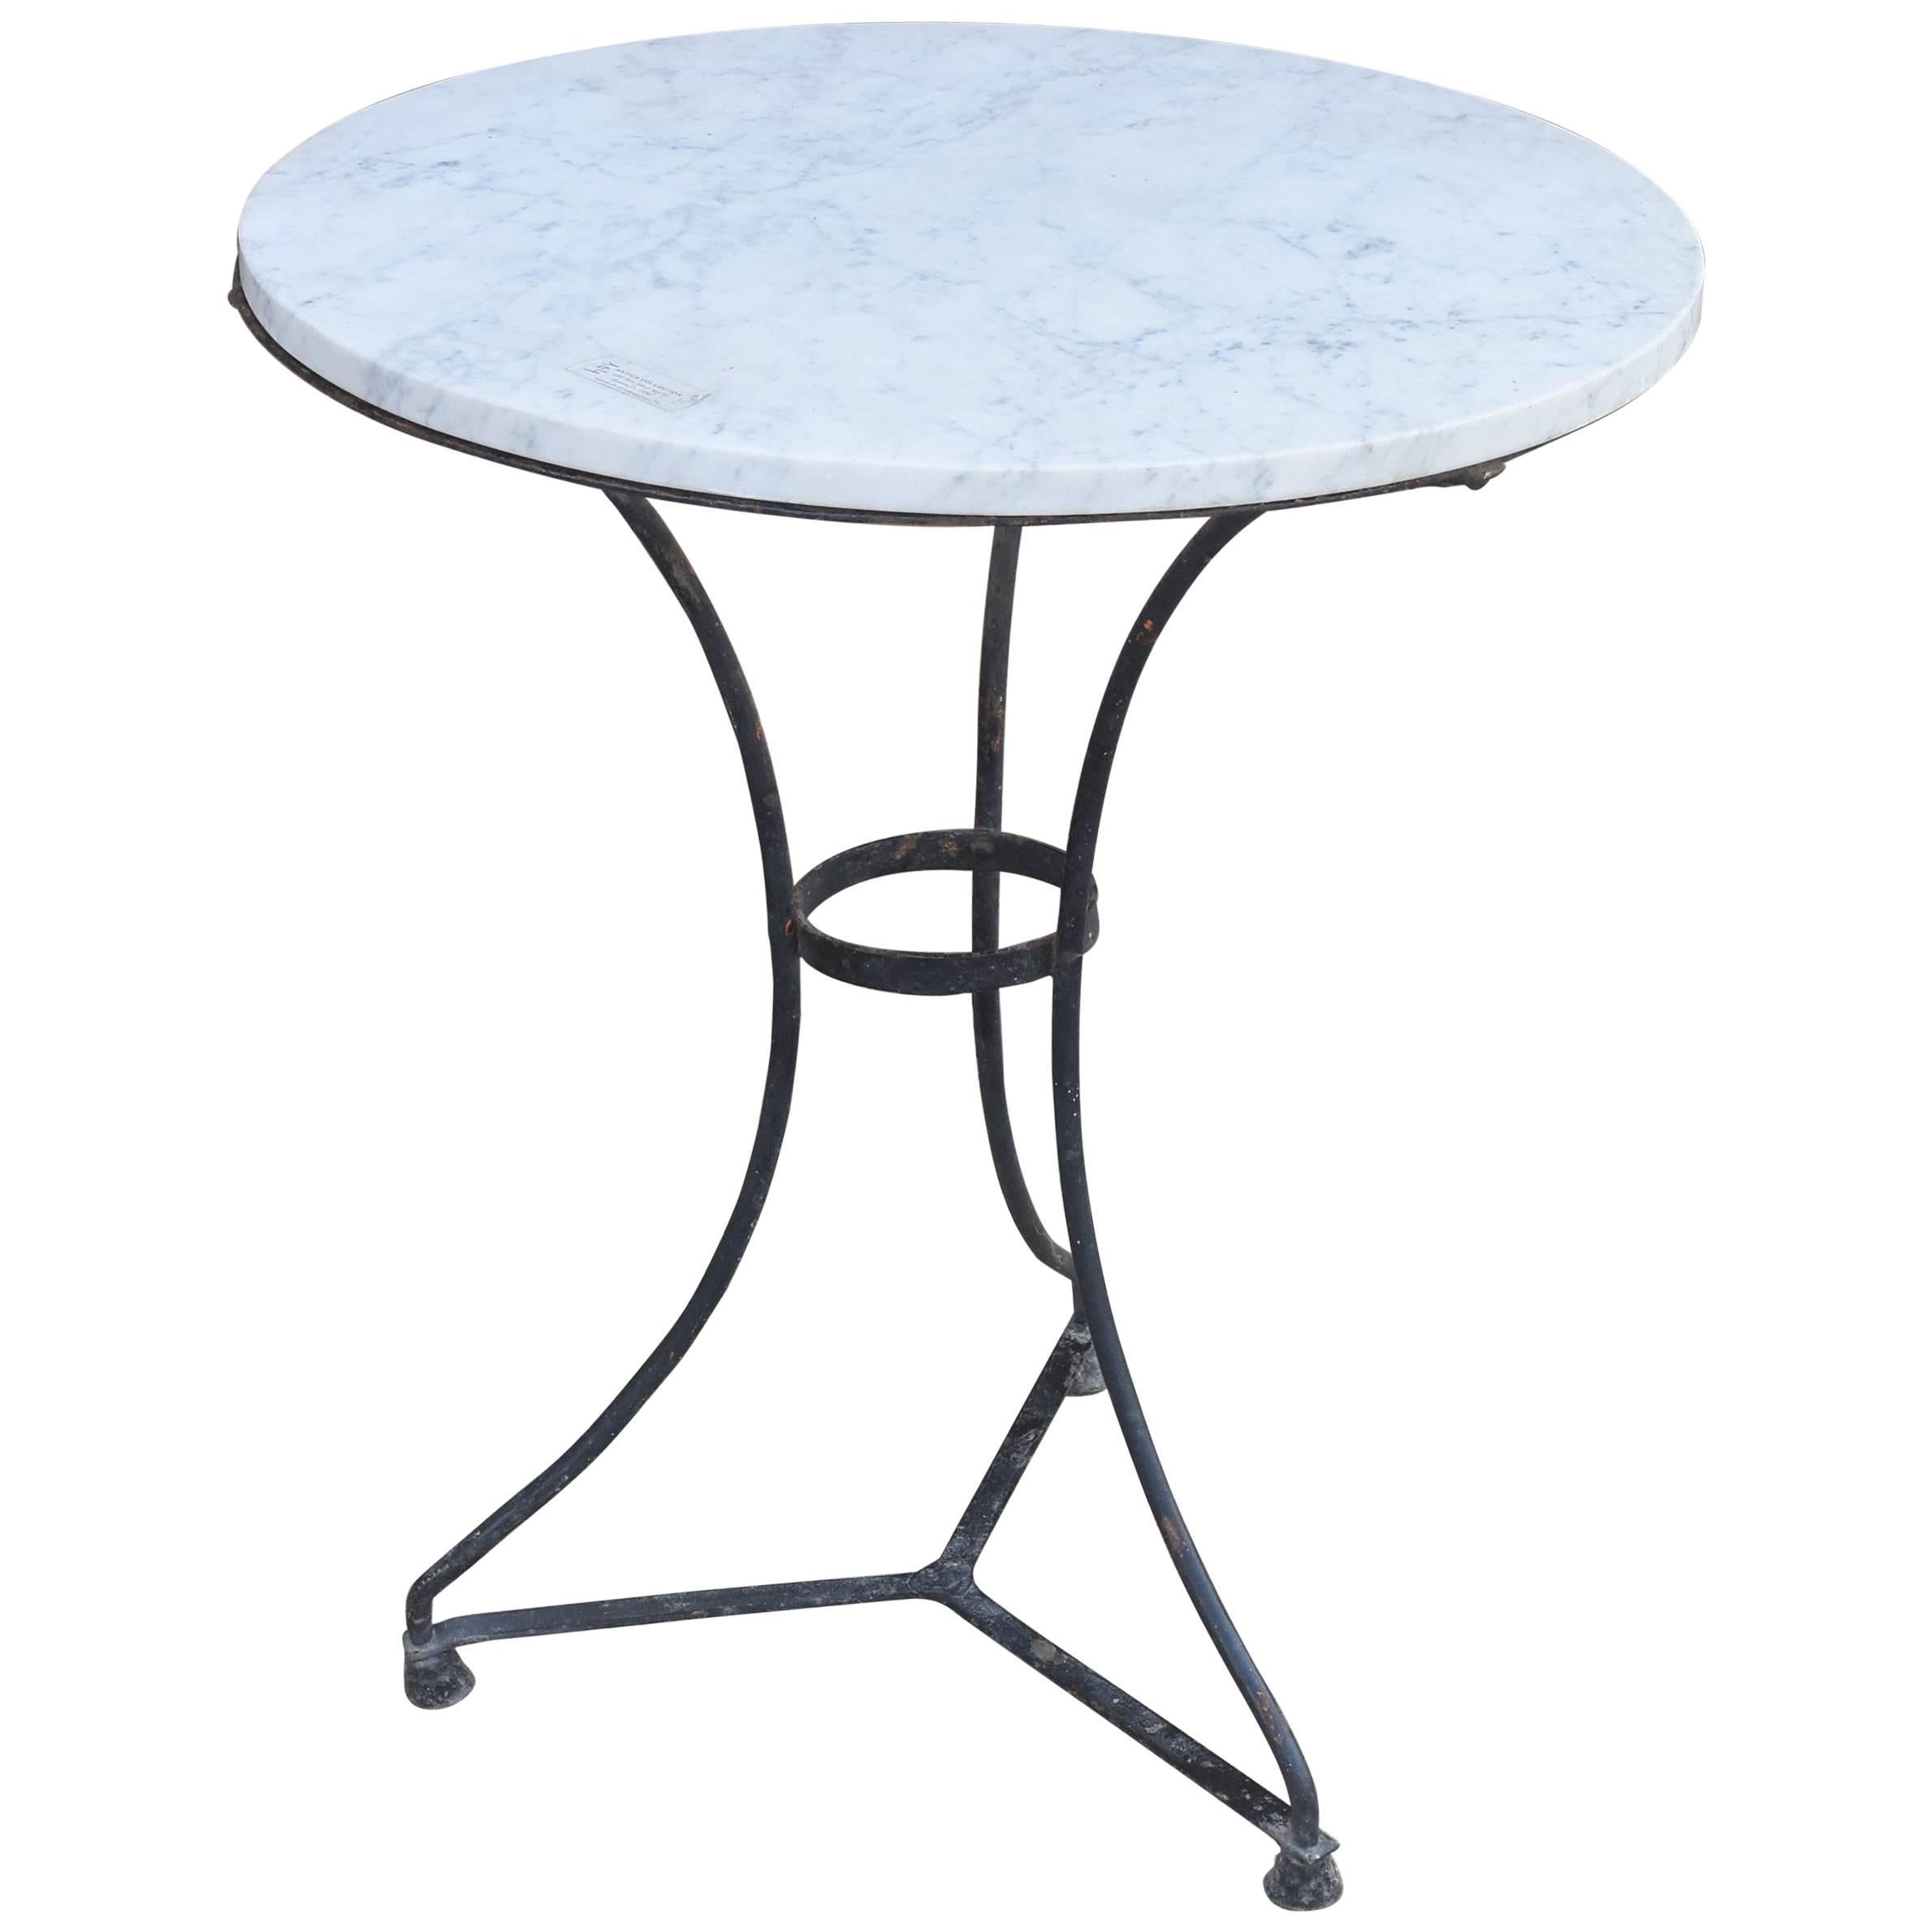 Late 19th Century French Iron Bistro Table Painted Black with White Marble Top